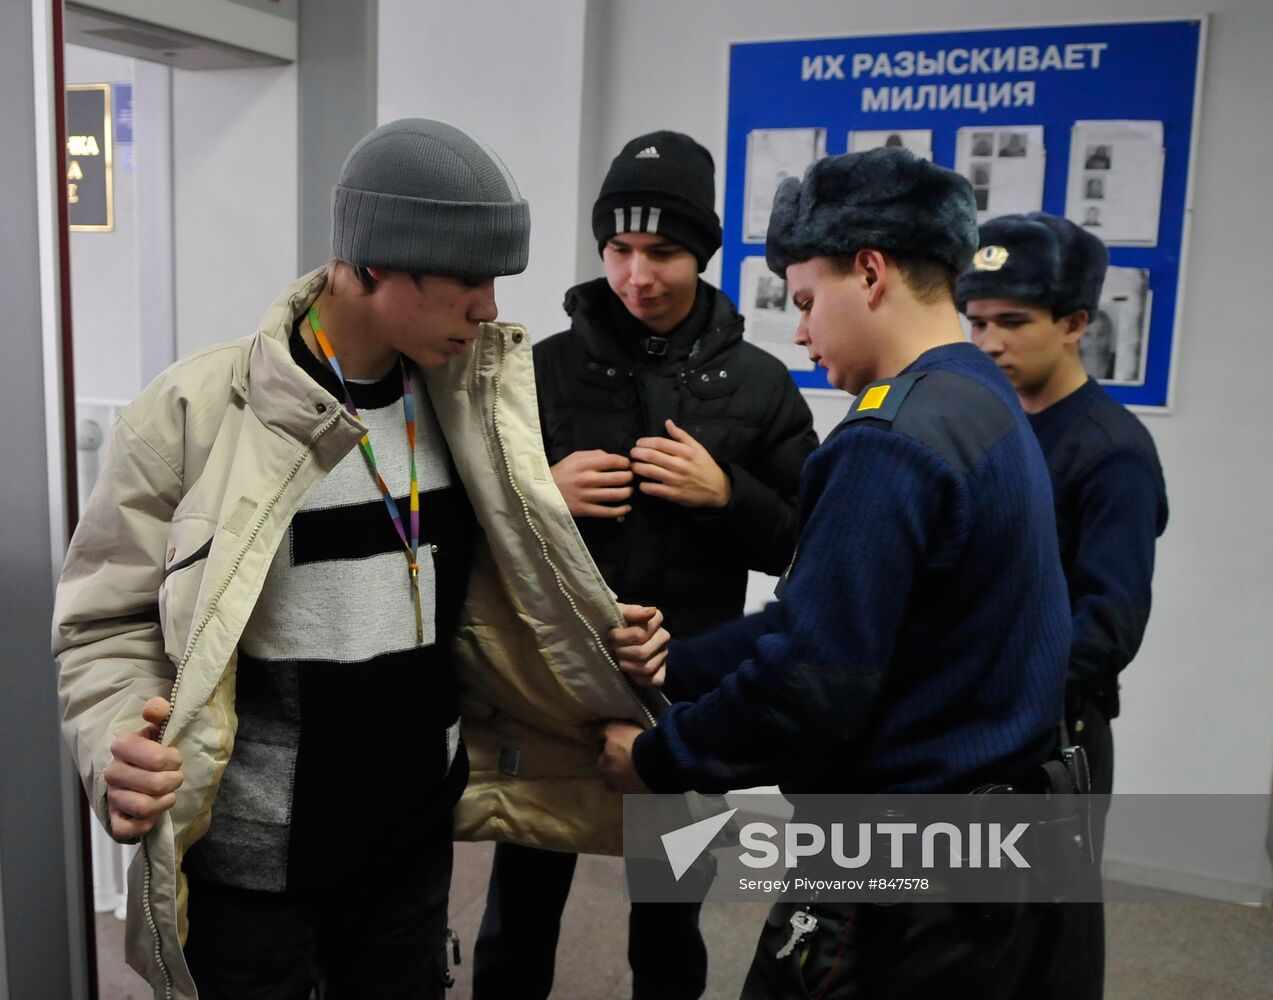 Tightening security at the Rostov-on-Don airport